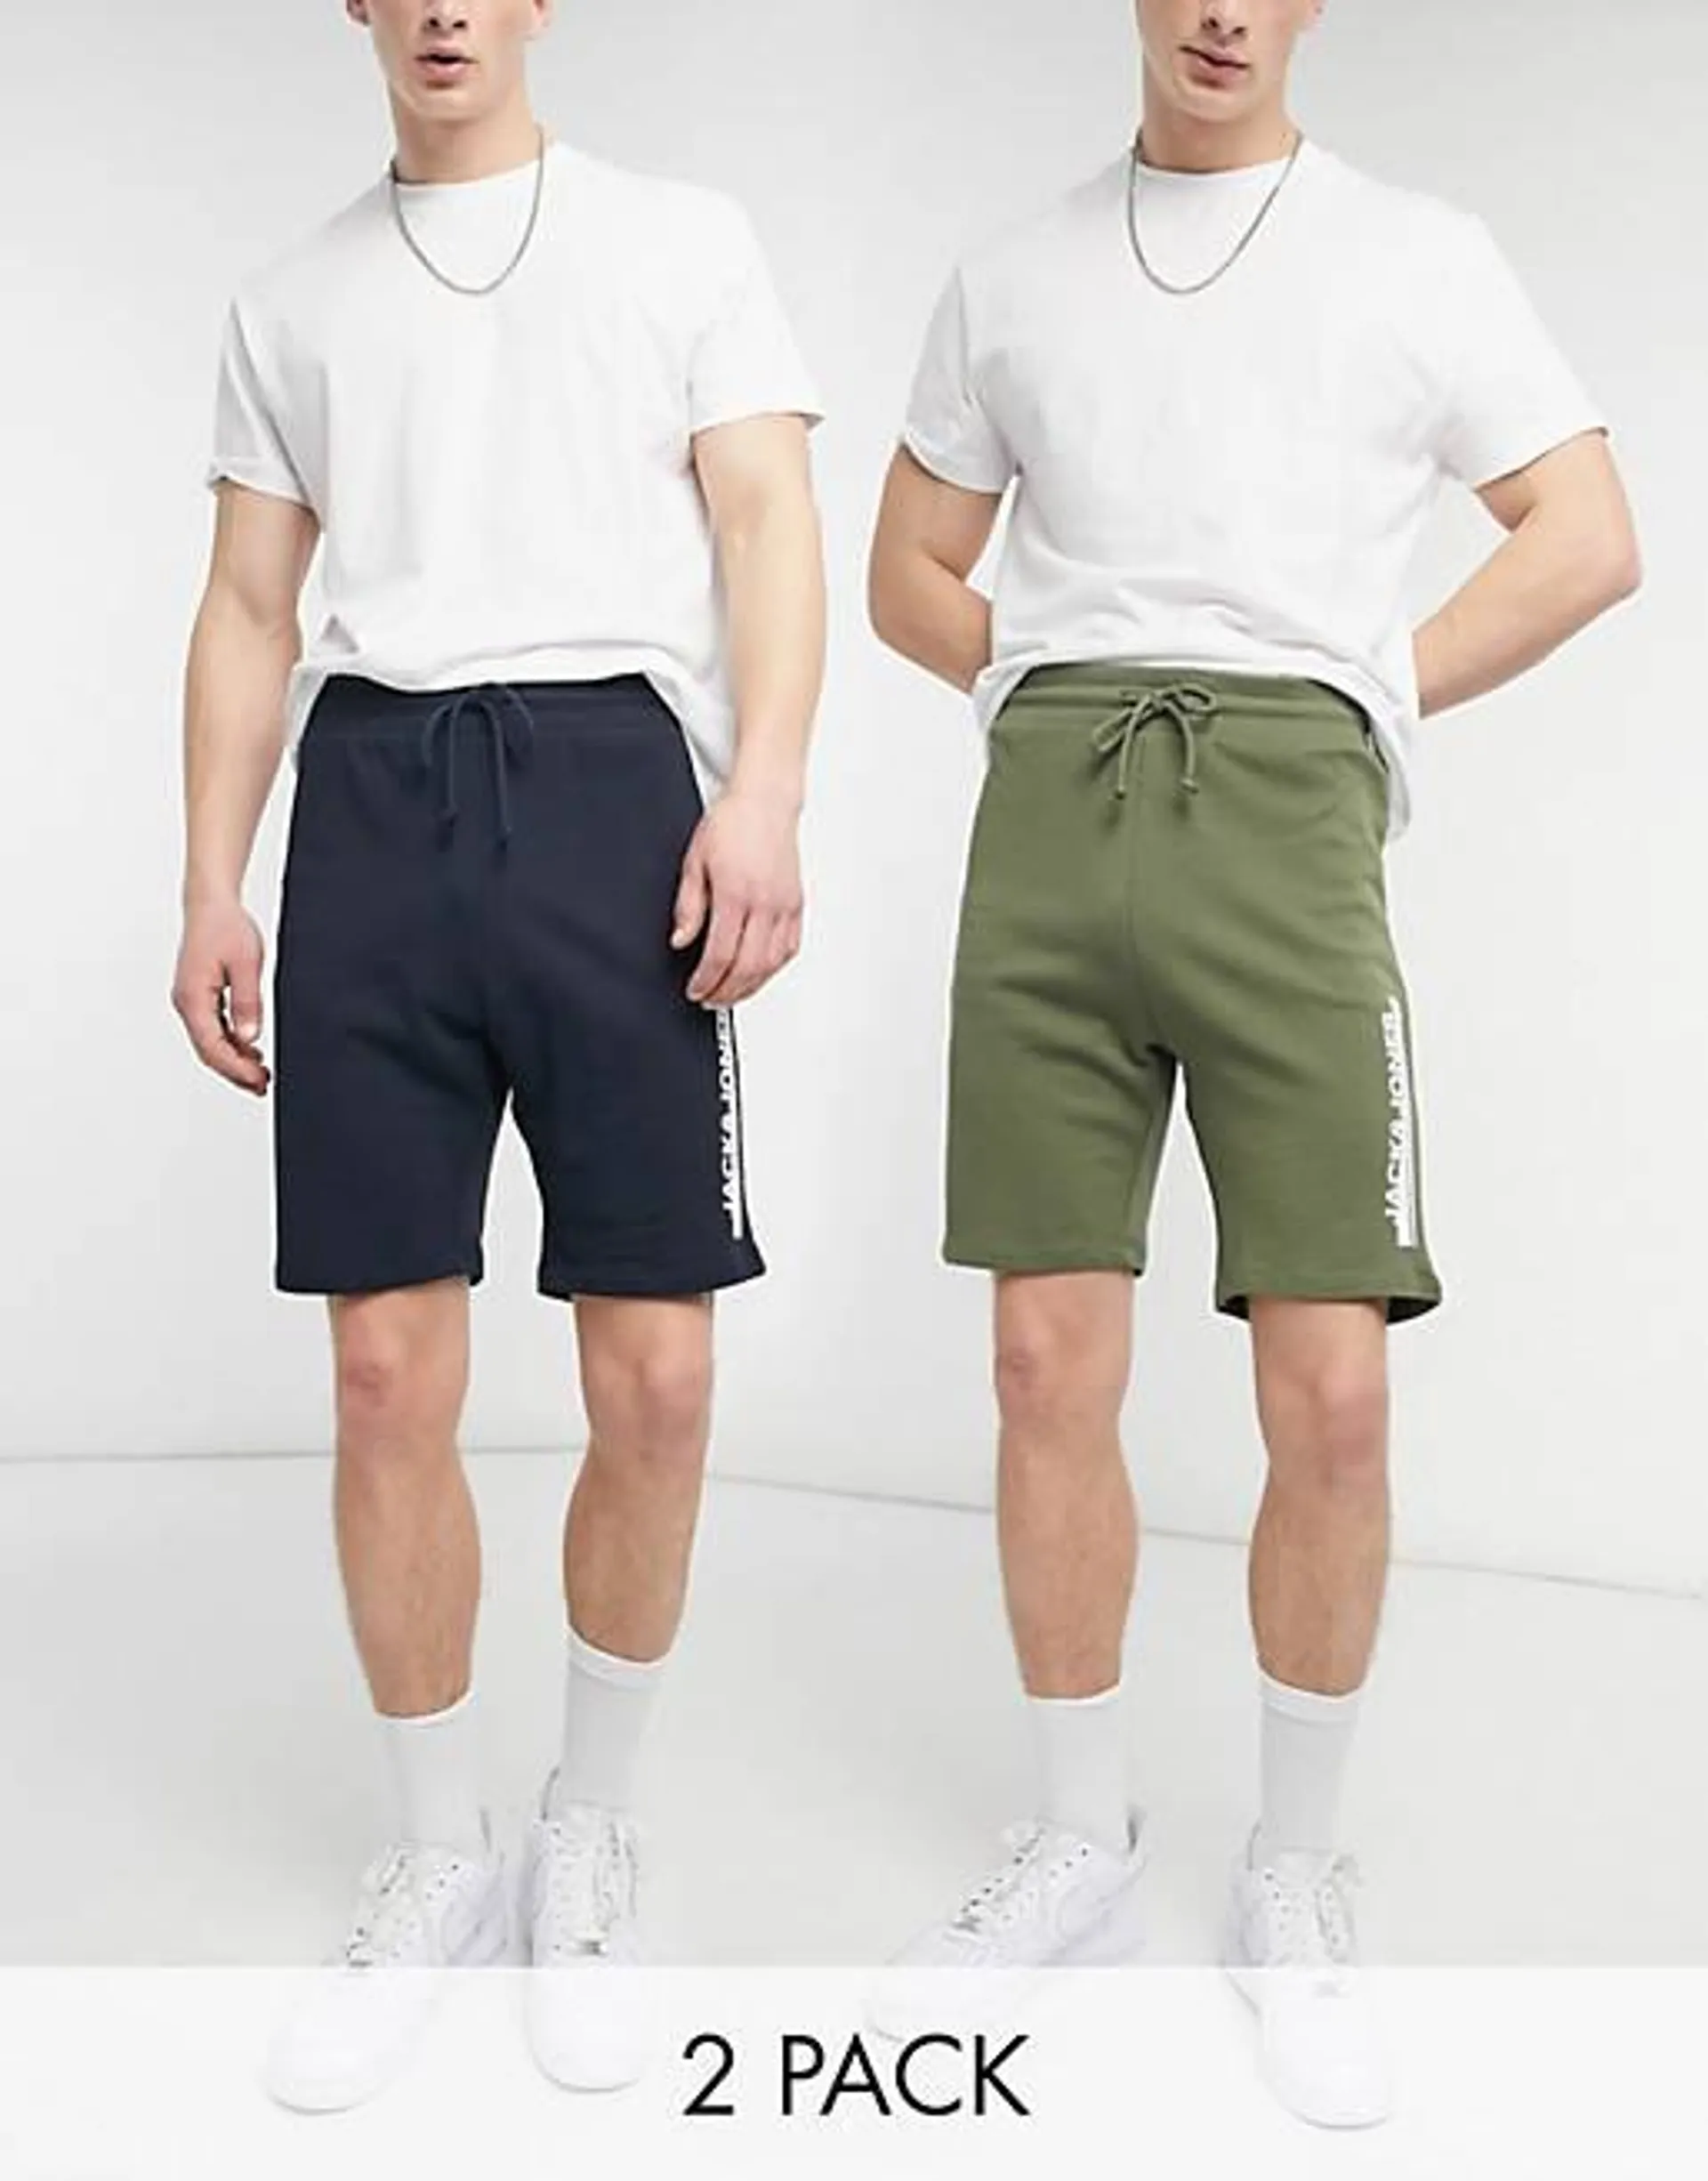 Jack and Jones 2 pack jersey shorts in navy and dusty olive